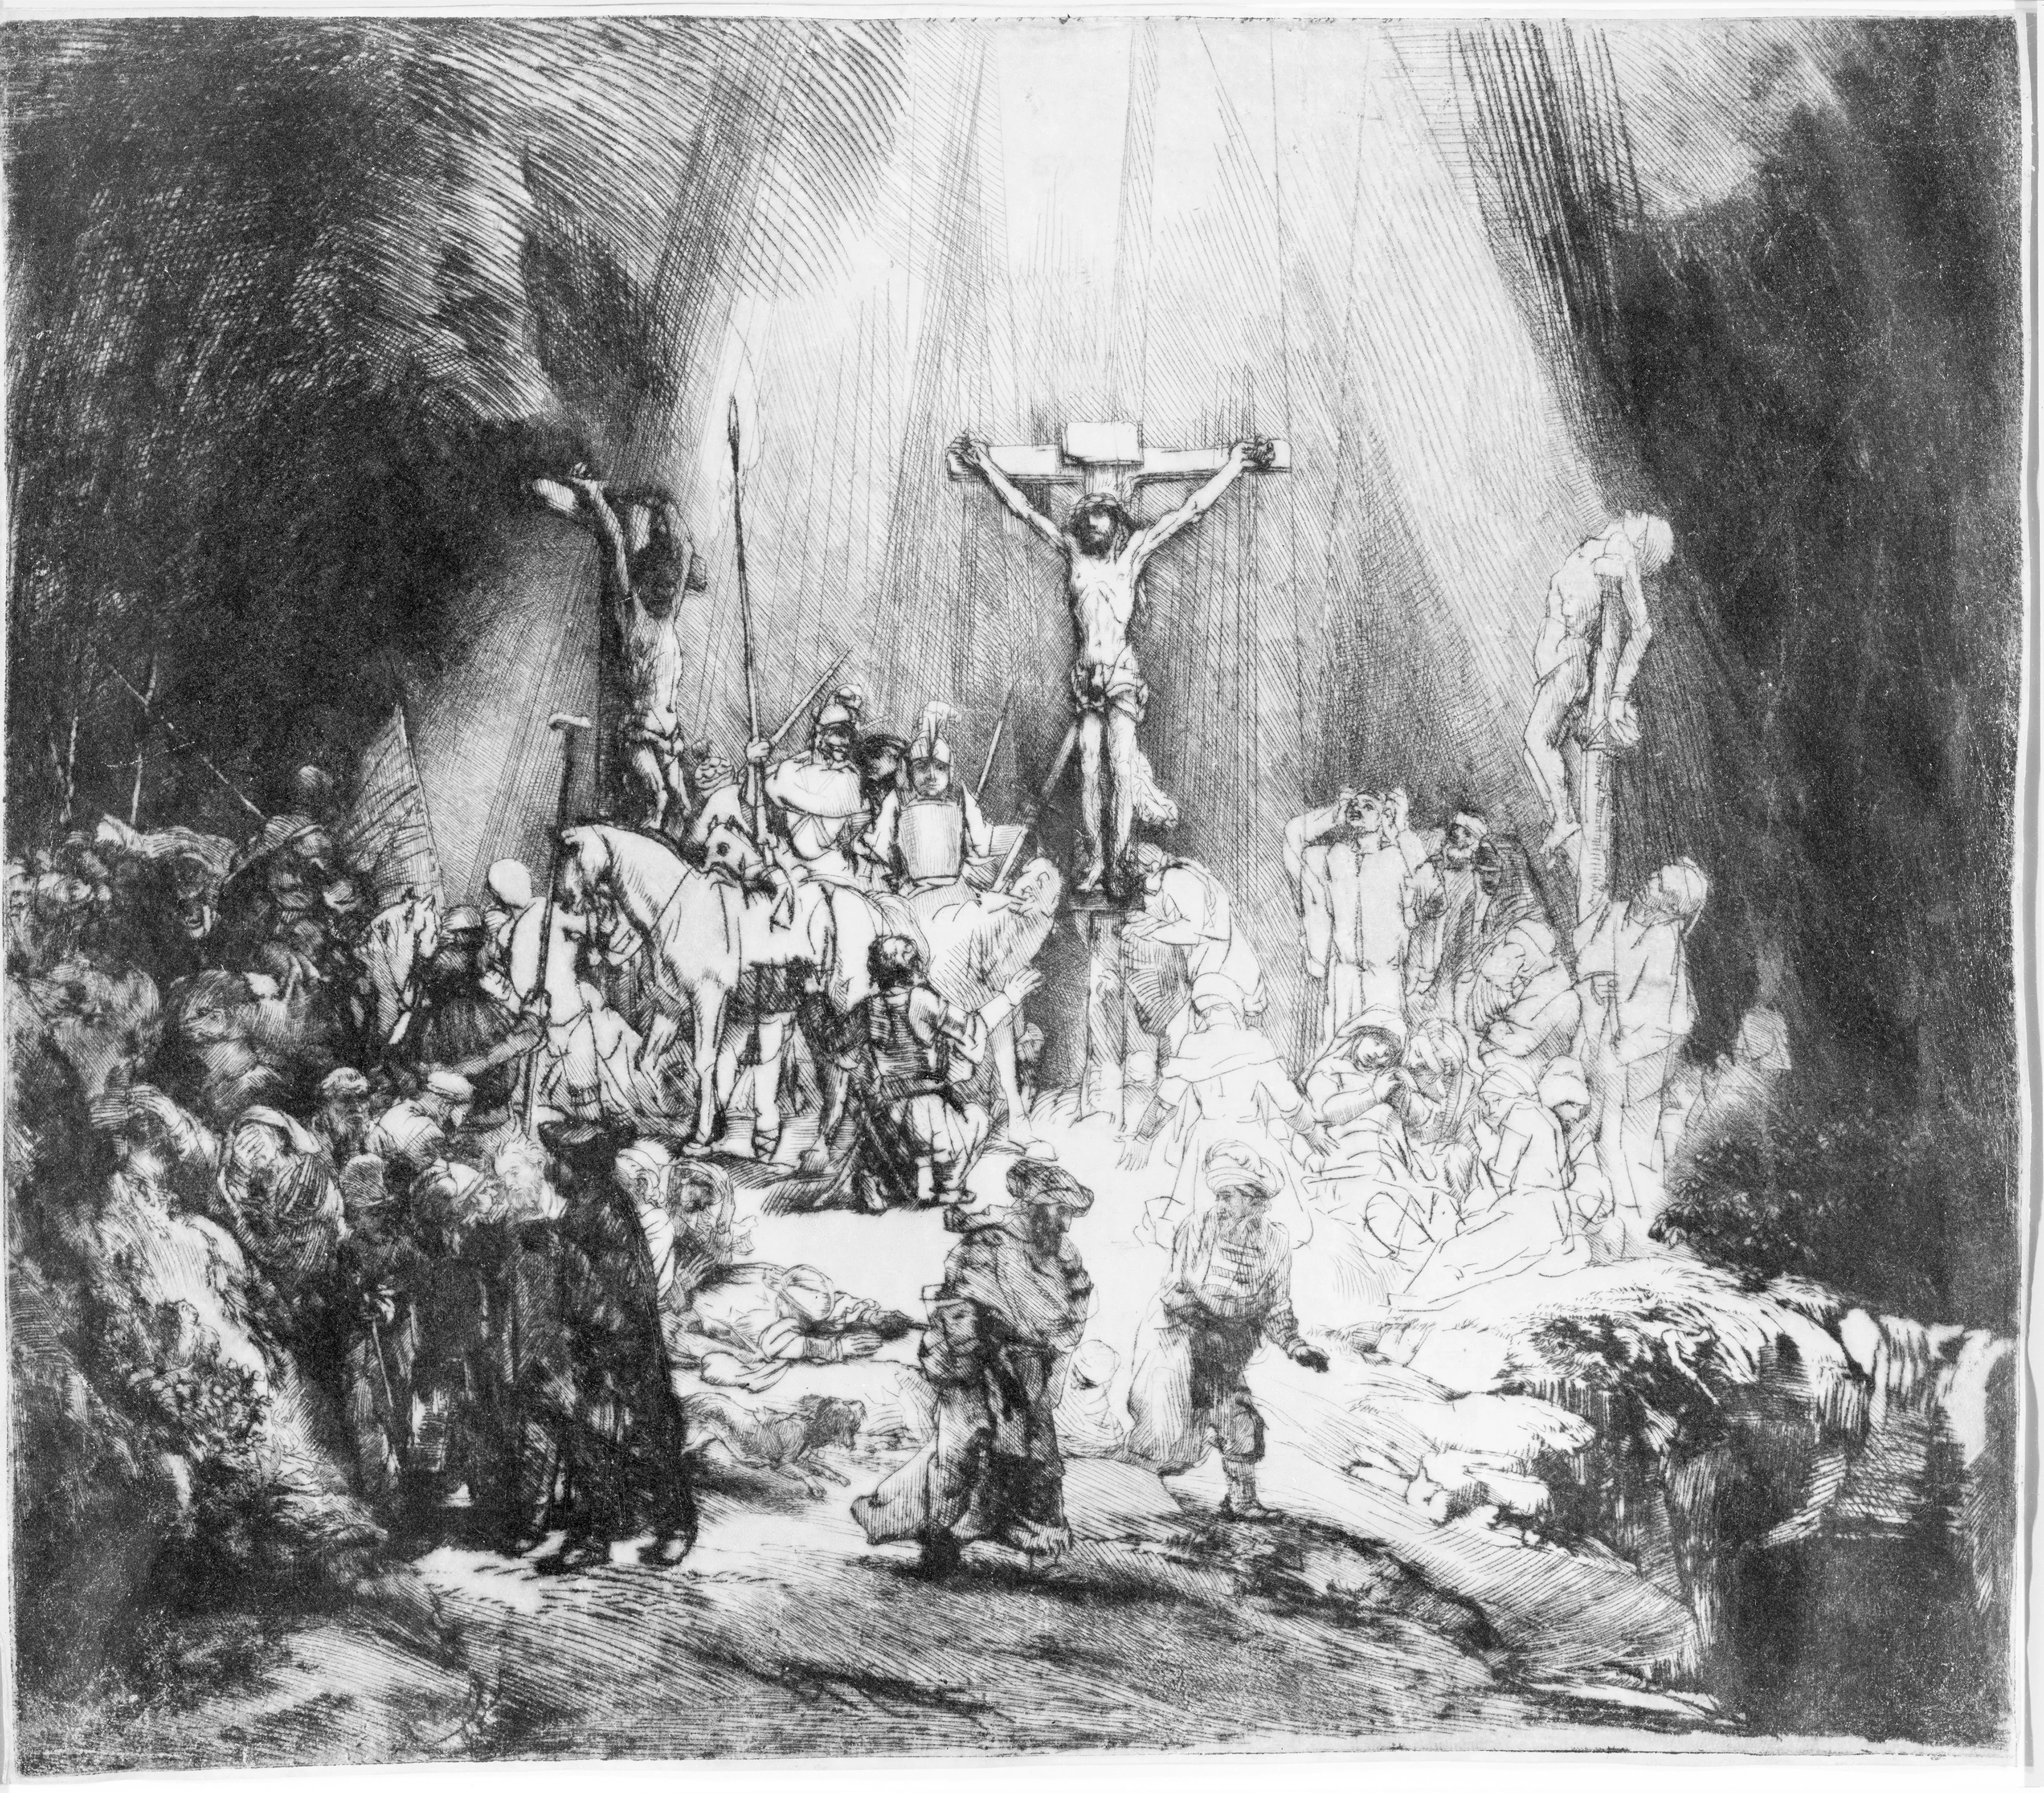 Christ Crucified between the Two Thieves: The Three Crosses, Rembrandt van Rijn